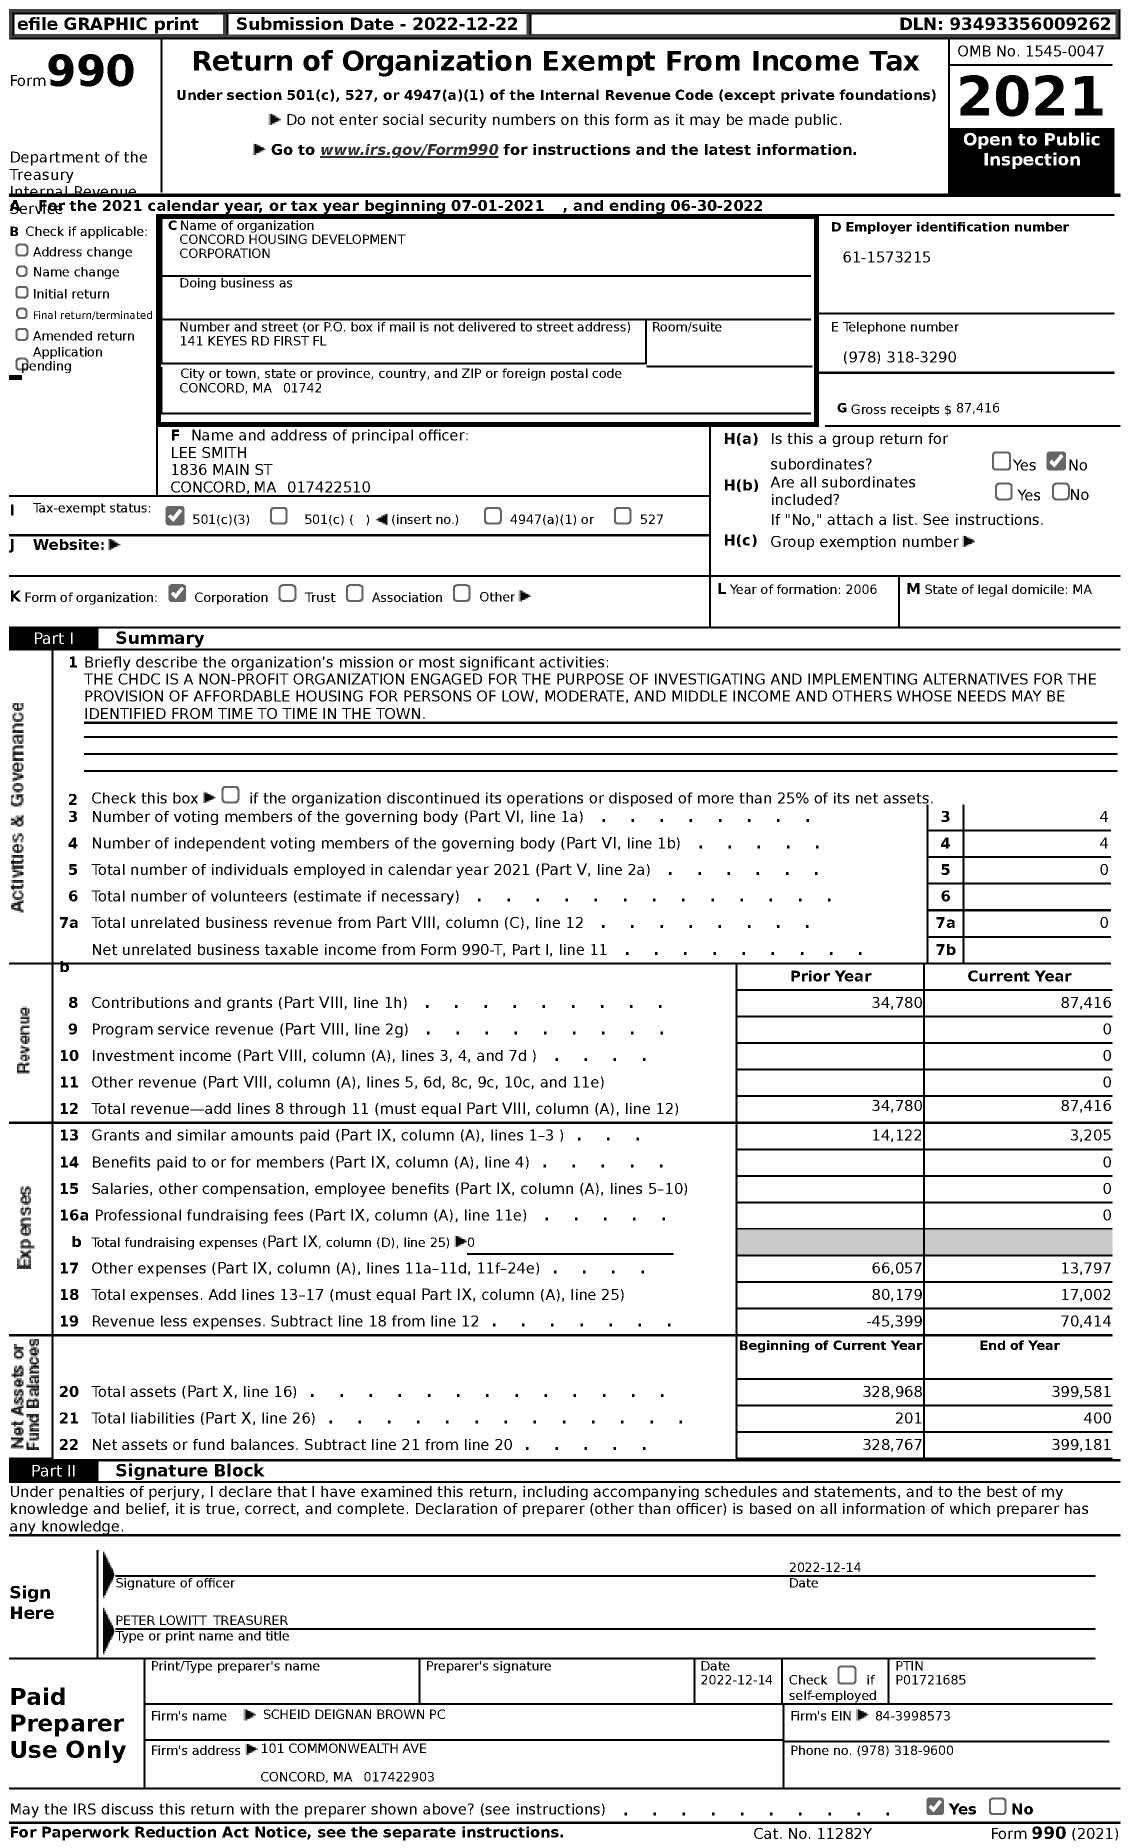 Image of first page of 2021 Form 990 for Concord Housing Development Corporation